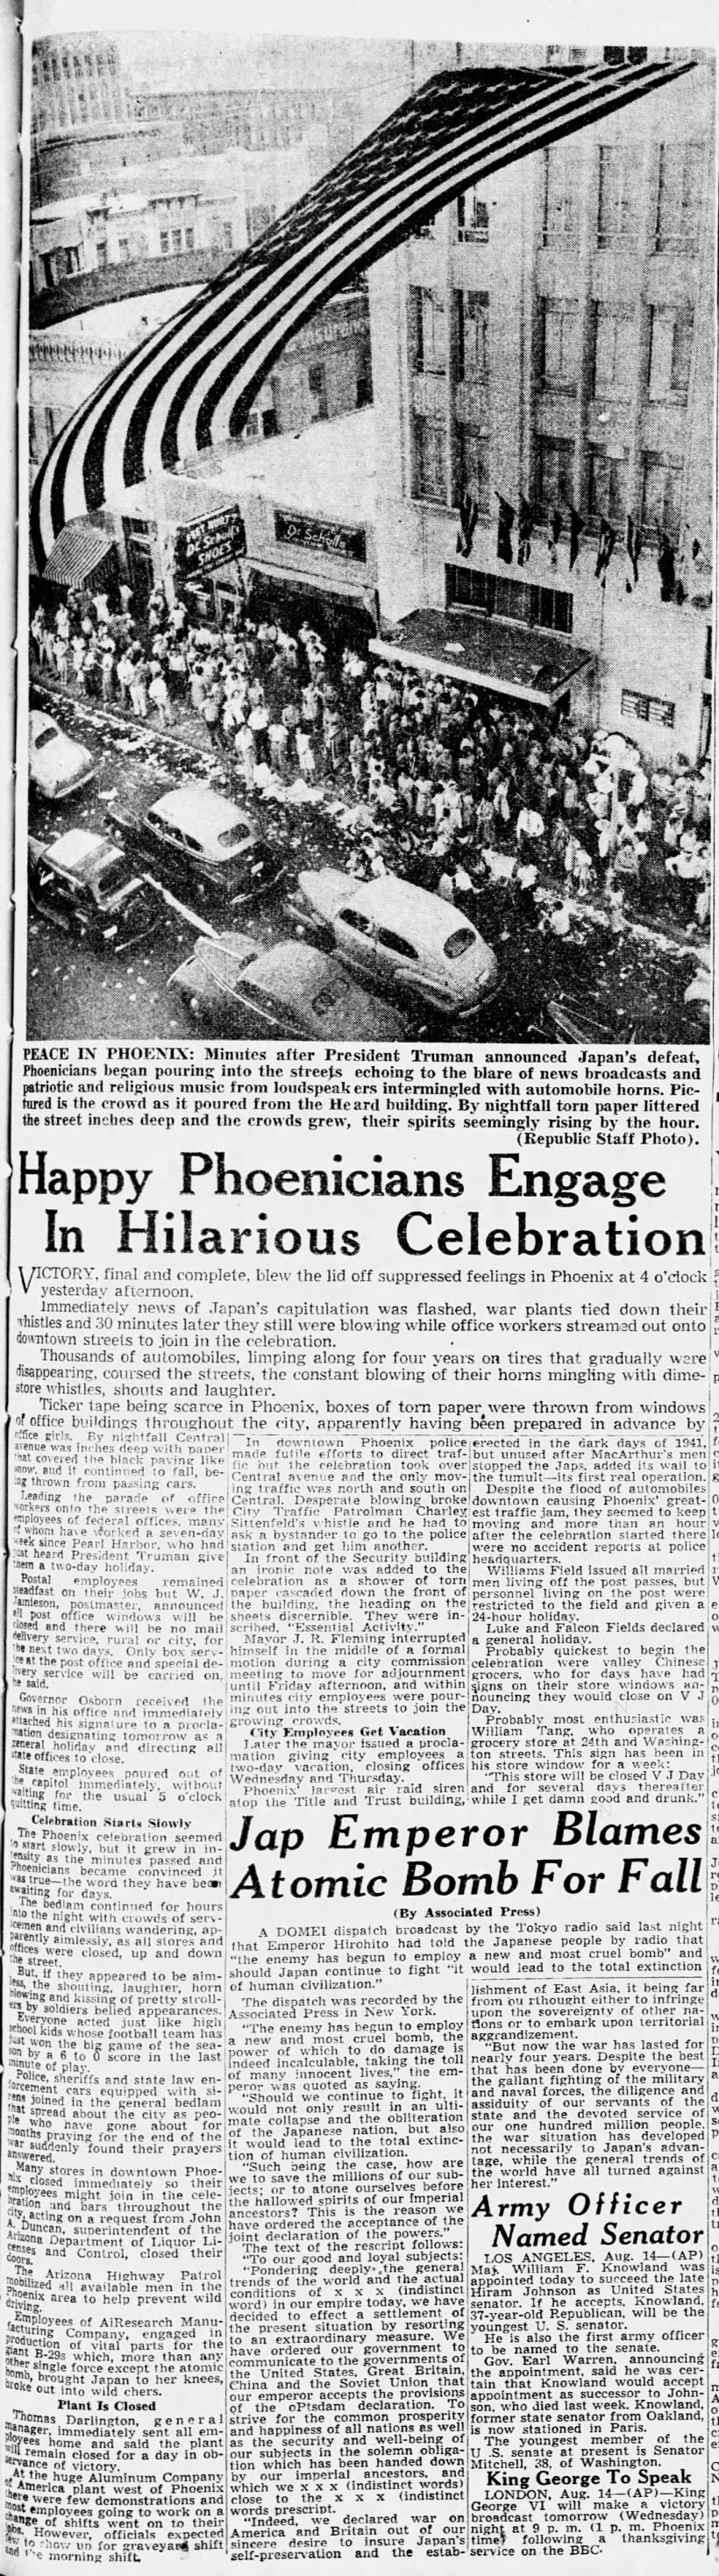 Newspaper photo and article with account of V-J Day celebrations in Phoenix, Arizona